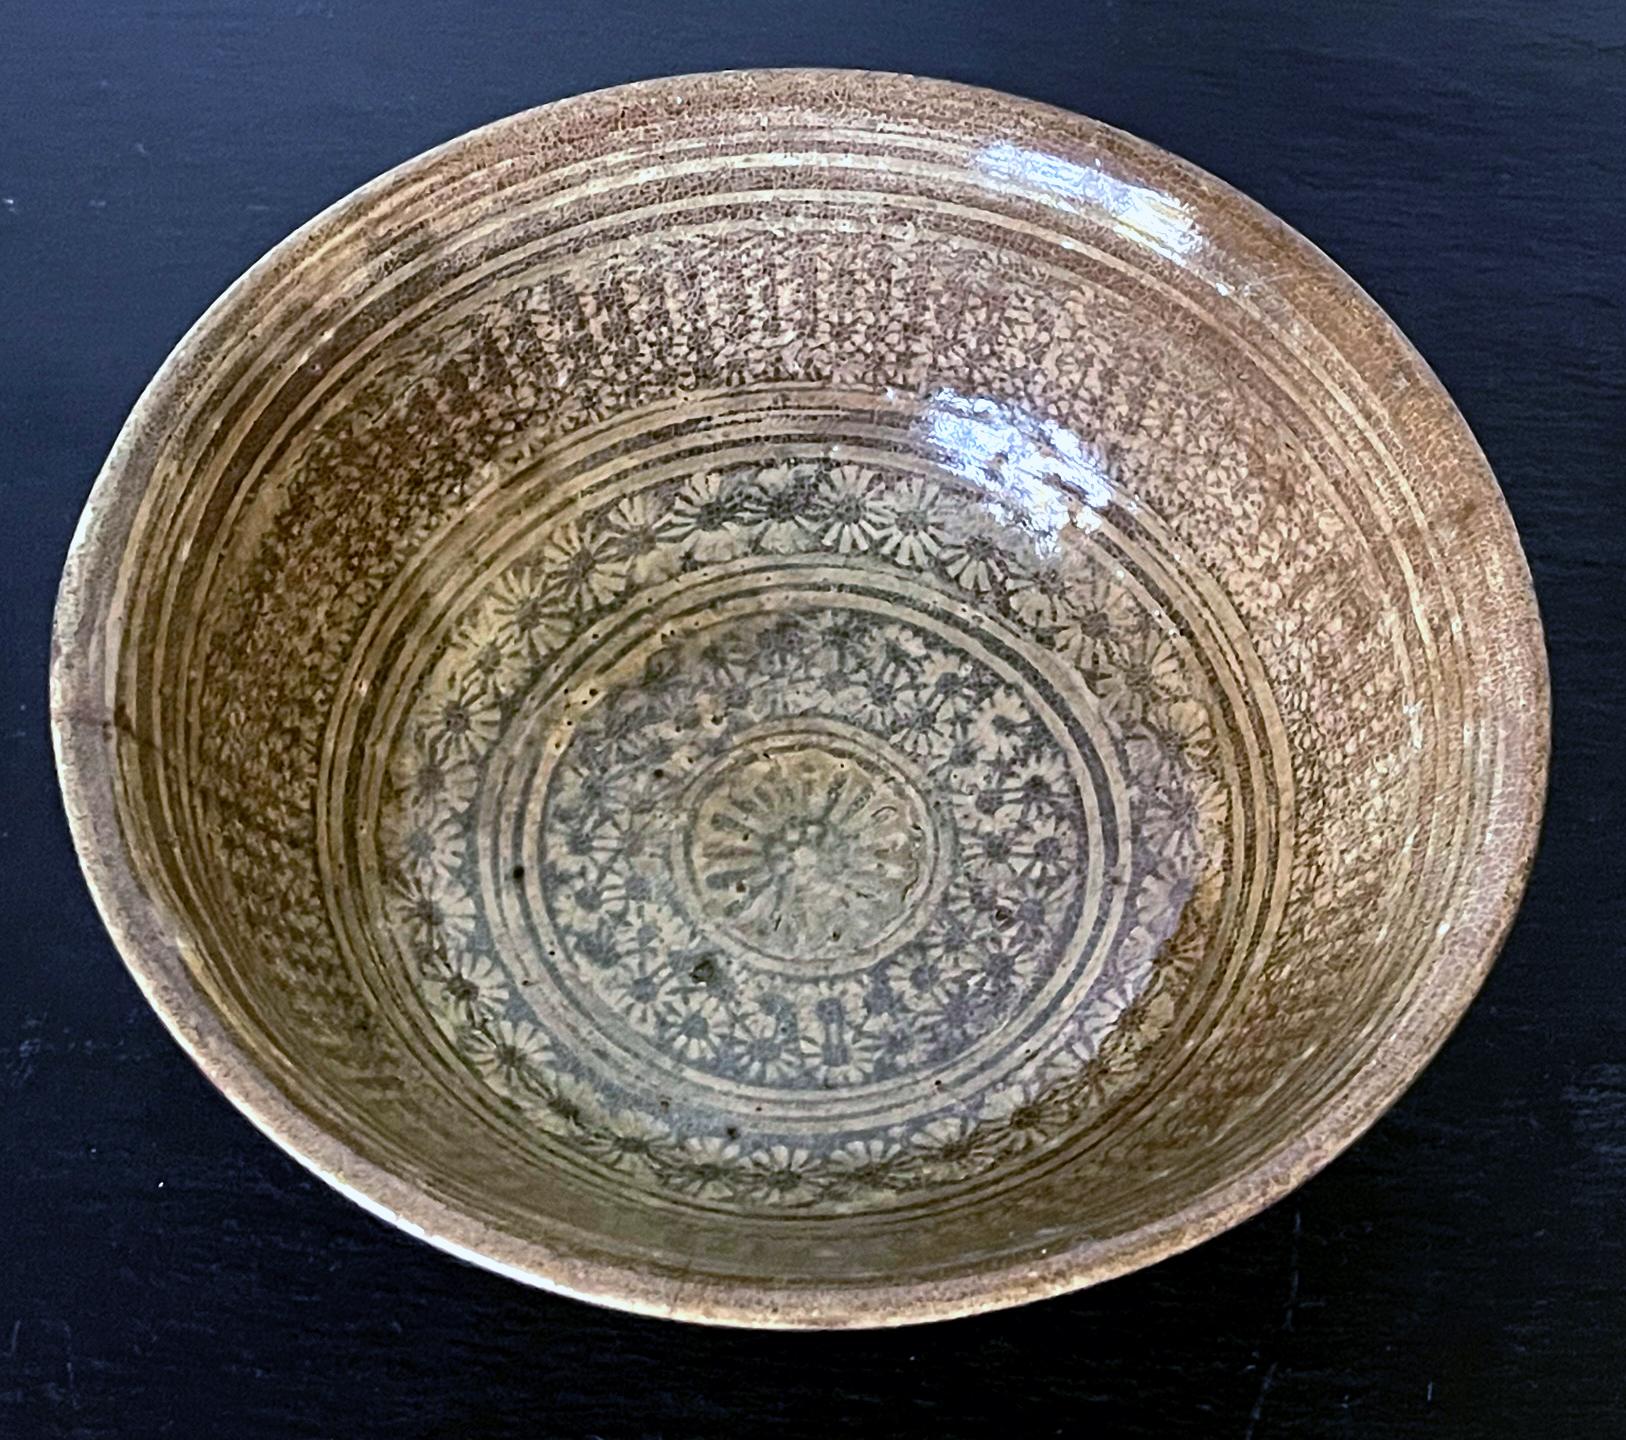 A Korean ceramic bowl supported on a short ring foot in the classic Buncheong (or Punch'ong) style from early Joseon Dynasty circa 15th century. The bowl features a beautiful dense composition of white slip decoration using stamping technique. With